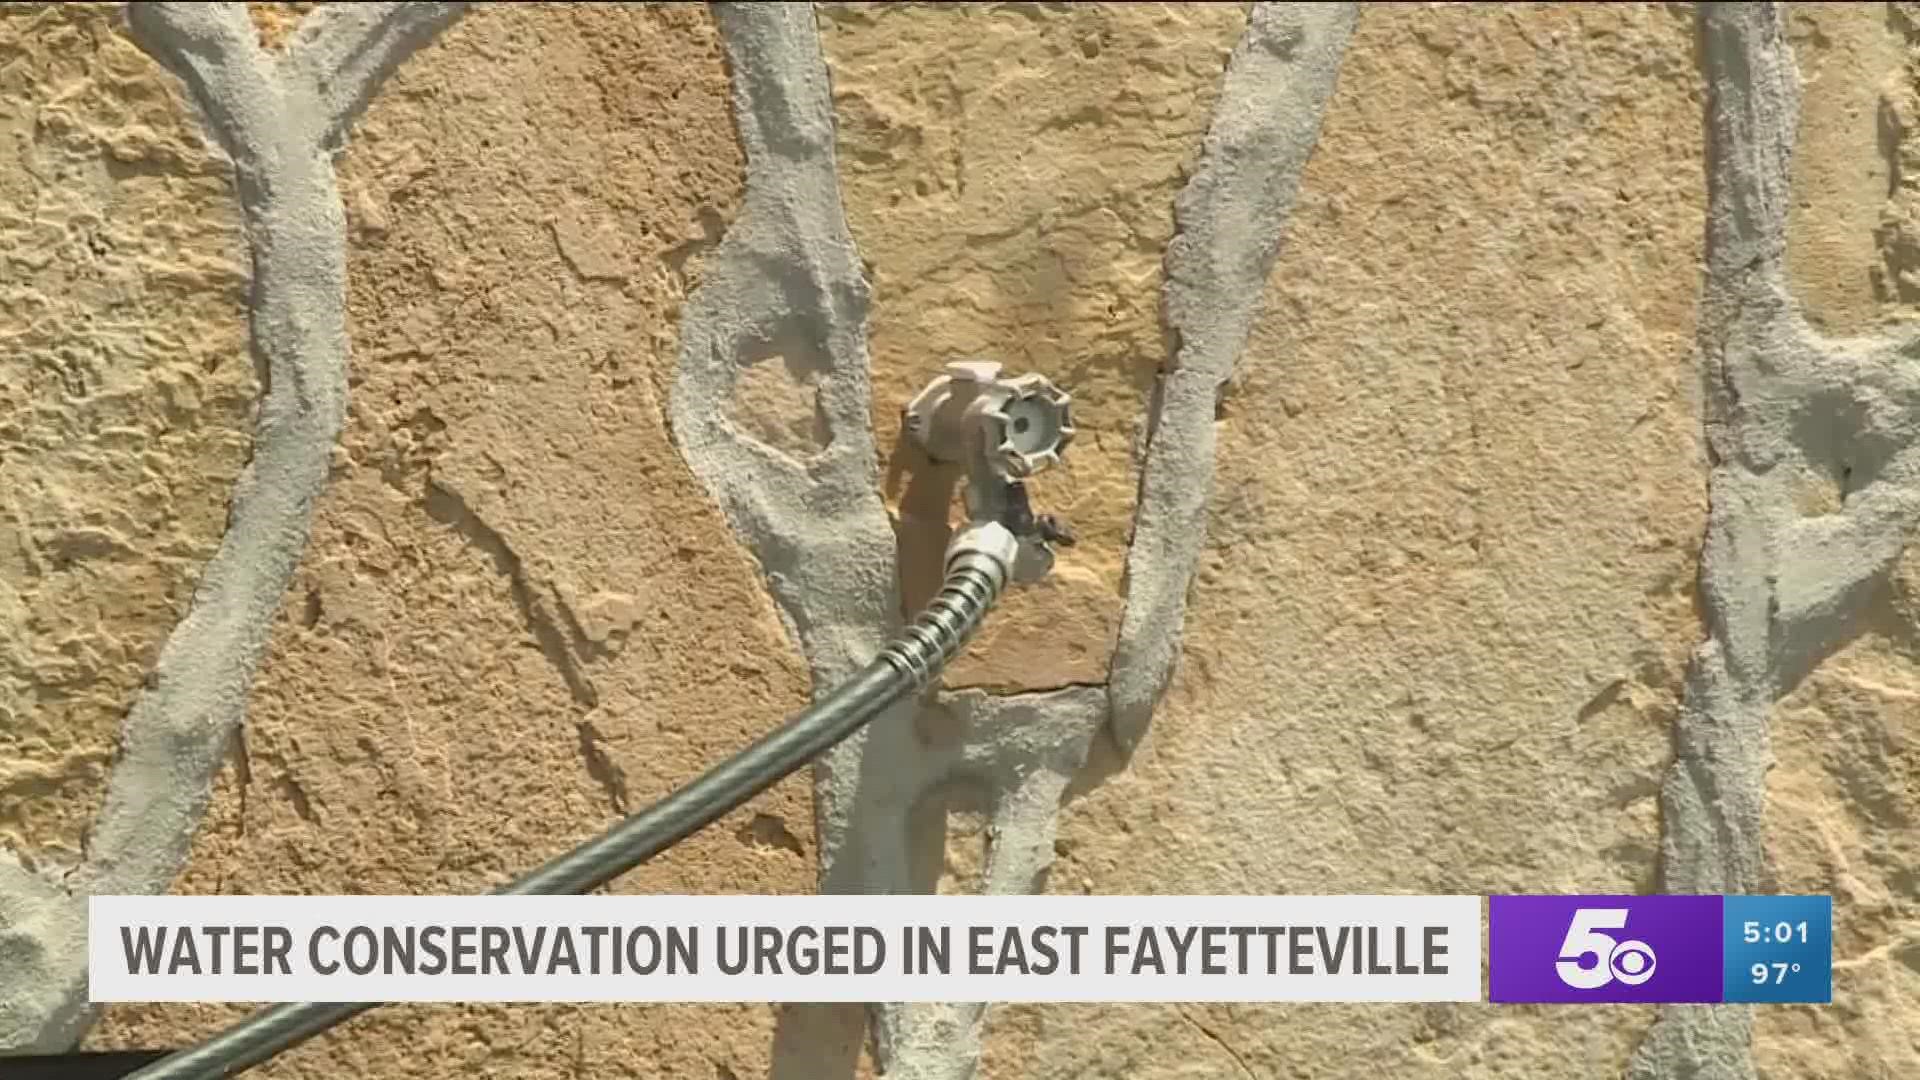 The City of Fayetteville is asking people with homes and businesses in east Fayetteville and Goshen to conserve their water usage.